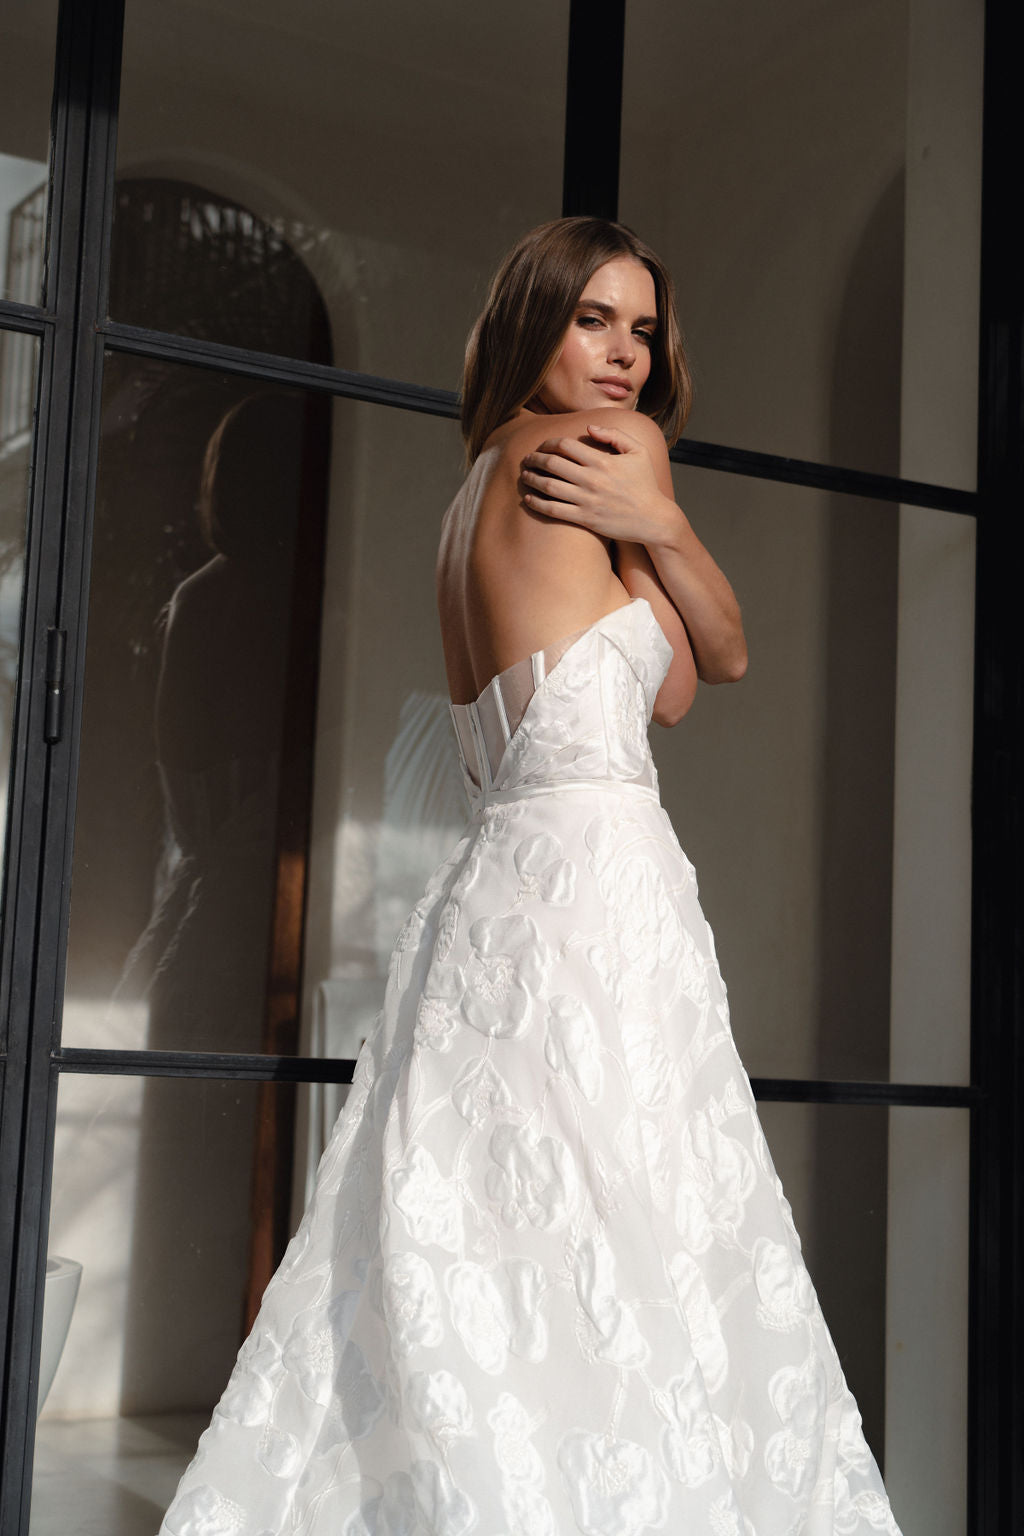 Moonflower - Coming soon! - Wedding Boutique 